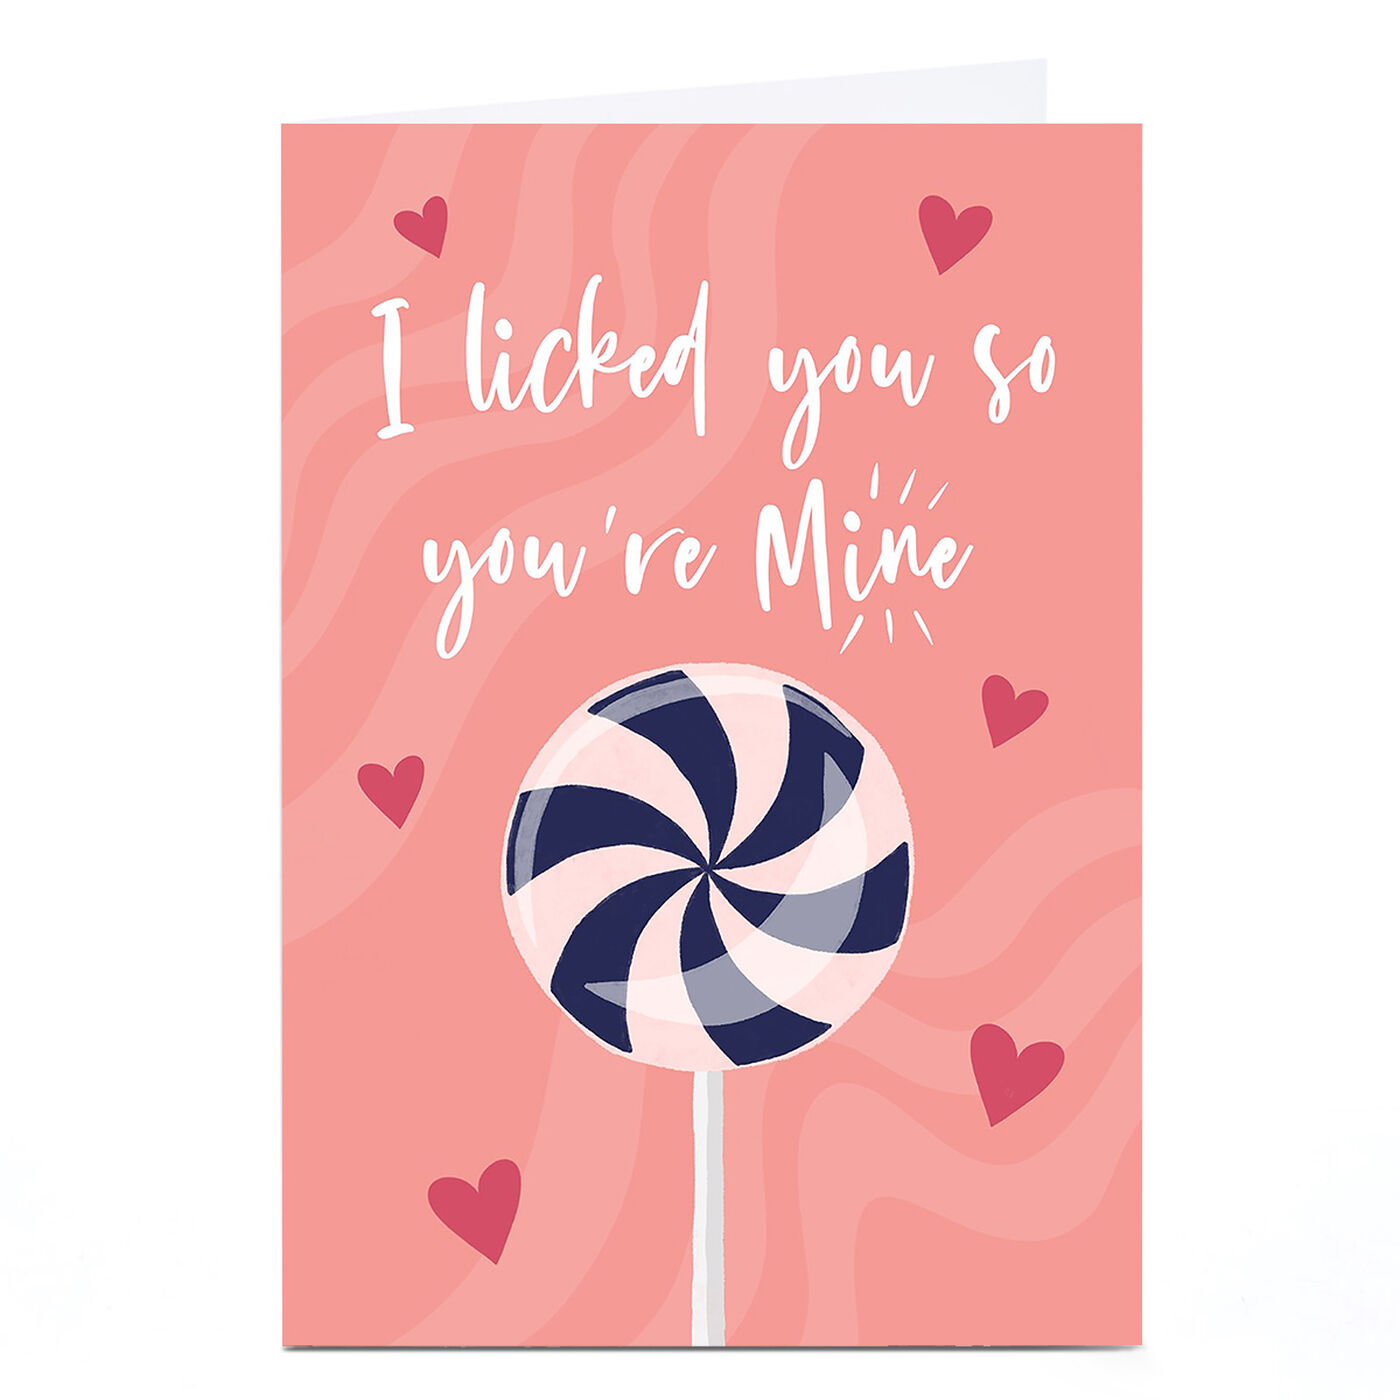 Buy Personalised Phoebe Munger Card - I Licked You for GBP 5.49 | Card ...